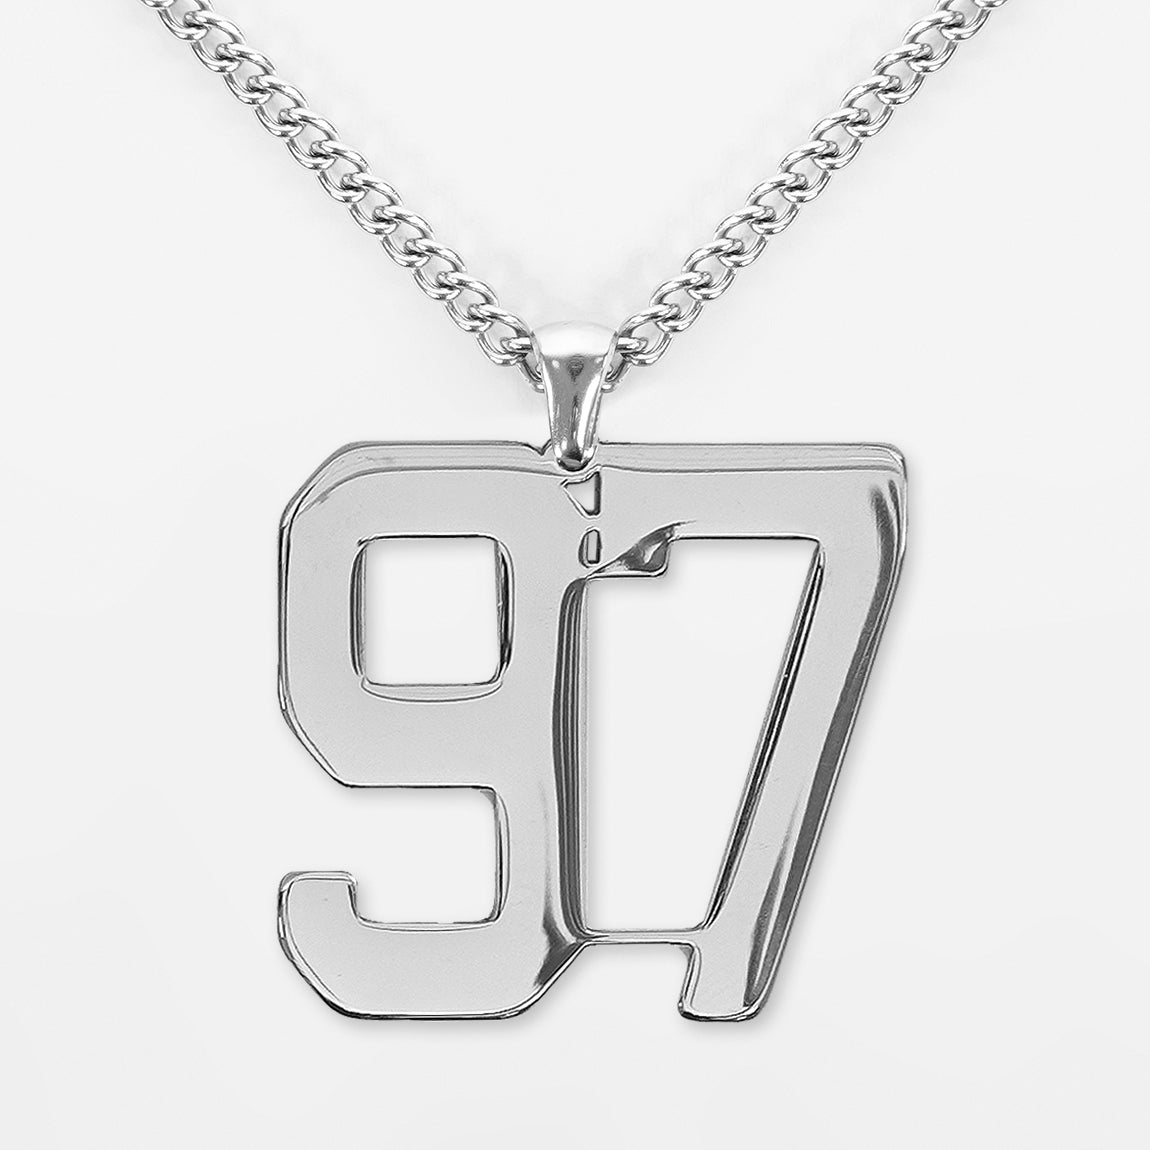 97 Number Pendant with Chain Necklace - Stainless Steel